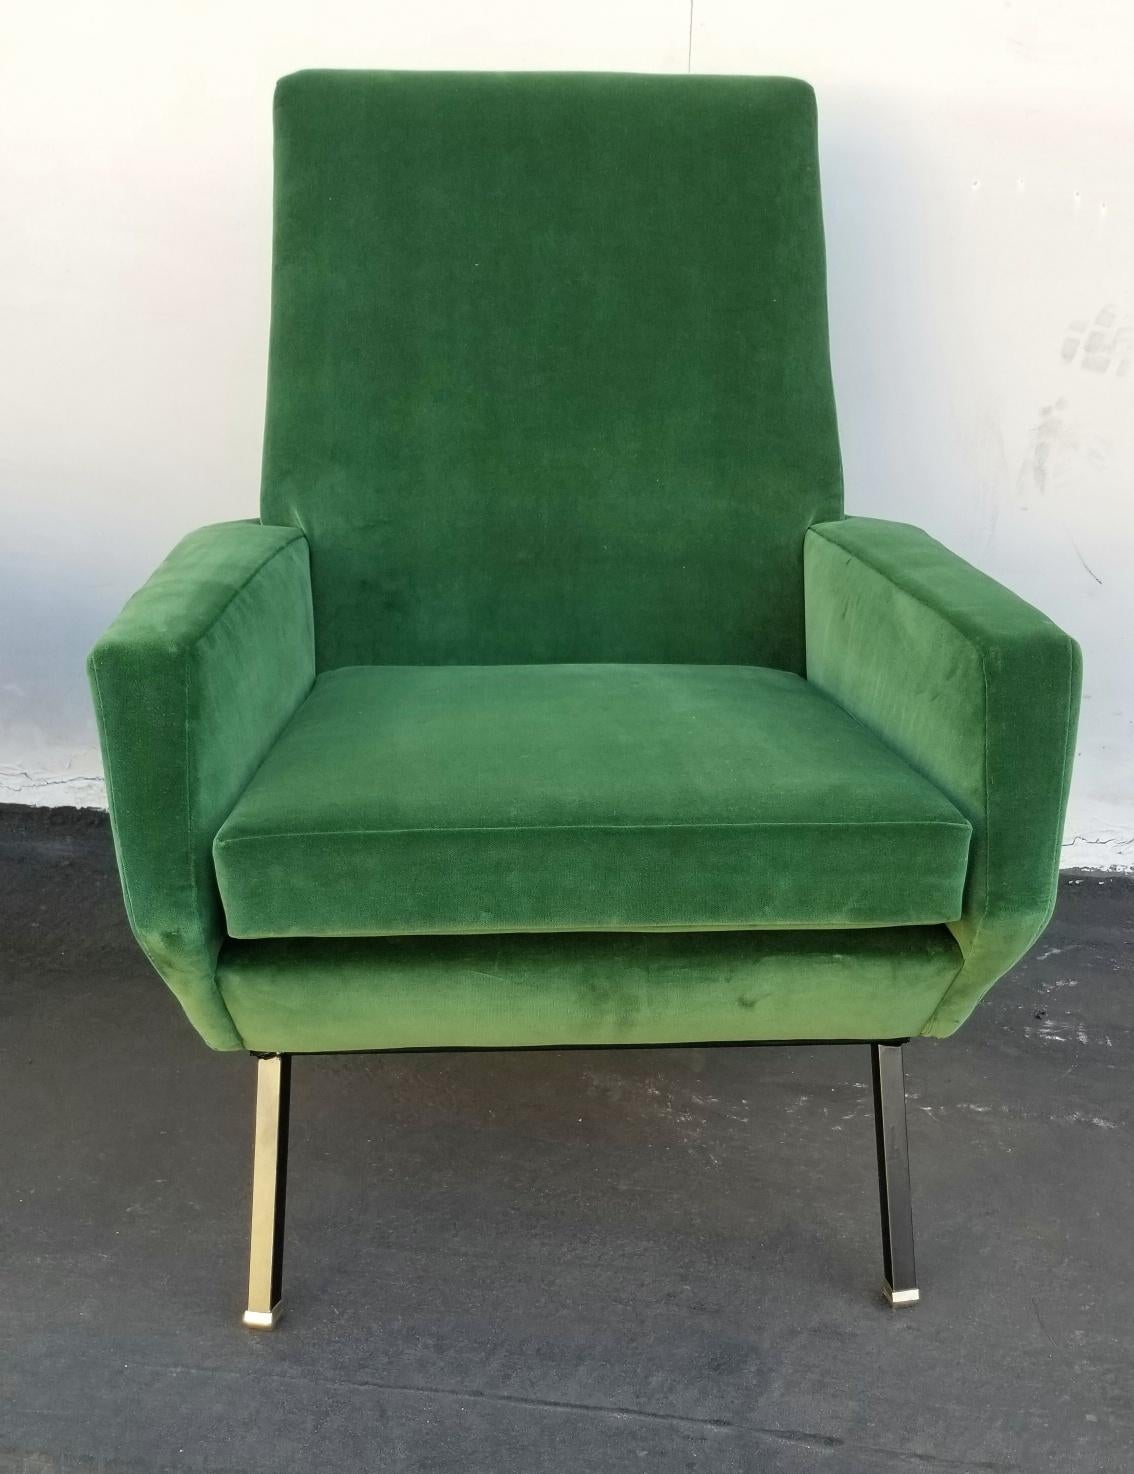 1950s pair of club chairs green velvet upholstery metal legs and brass boots.
  